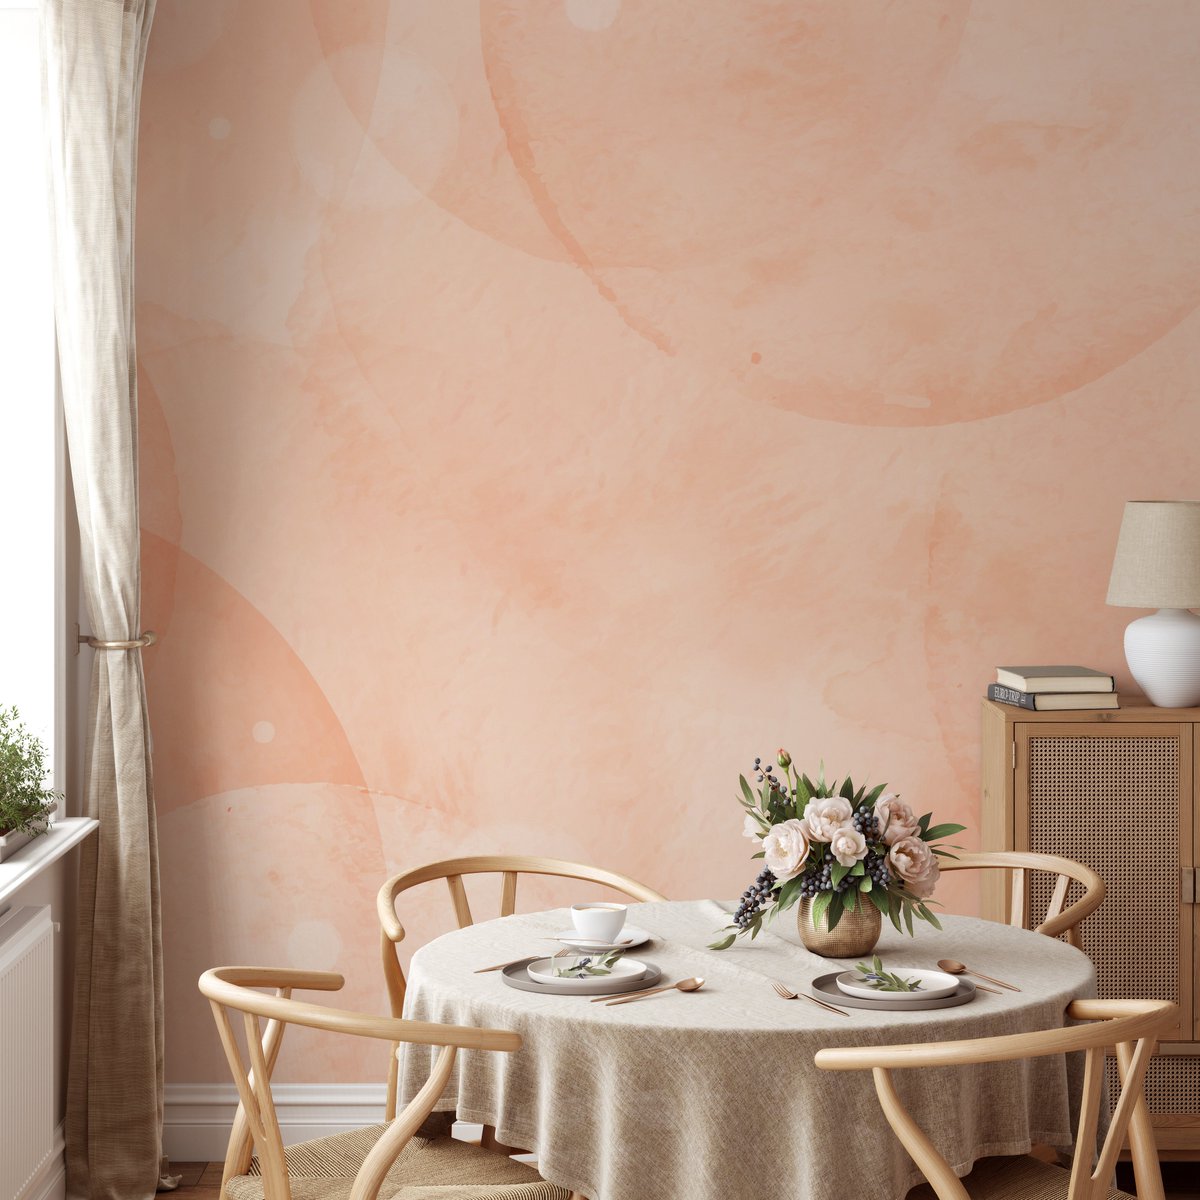 Enjoy the soothing vibes of our Delicate Peach Essence Wallpaper Mural. #watercolourwallpaper #peachwallpaper #designwallpaper #colourwallpaper #peachfuzzwallpapee #HomeDecor #WallpaperMural #PeachyKeen #InteriorDesign #RoomMakeover #CozyHome #WallArt  

bit.ly/3wgOhGt